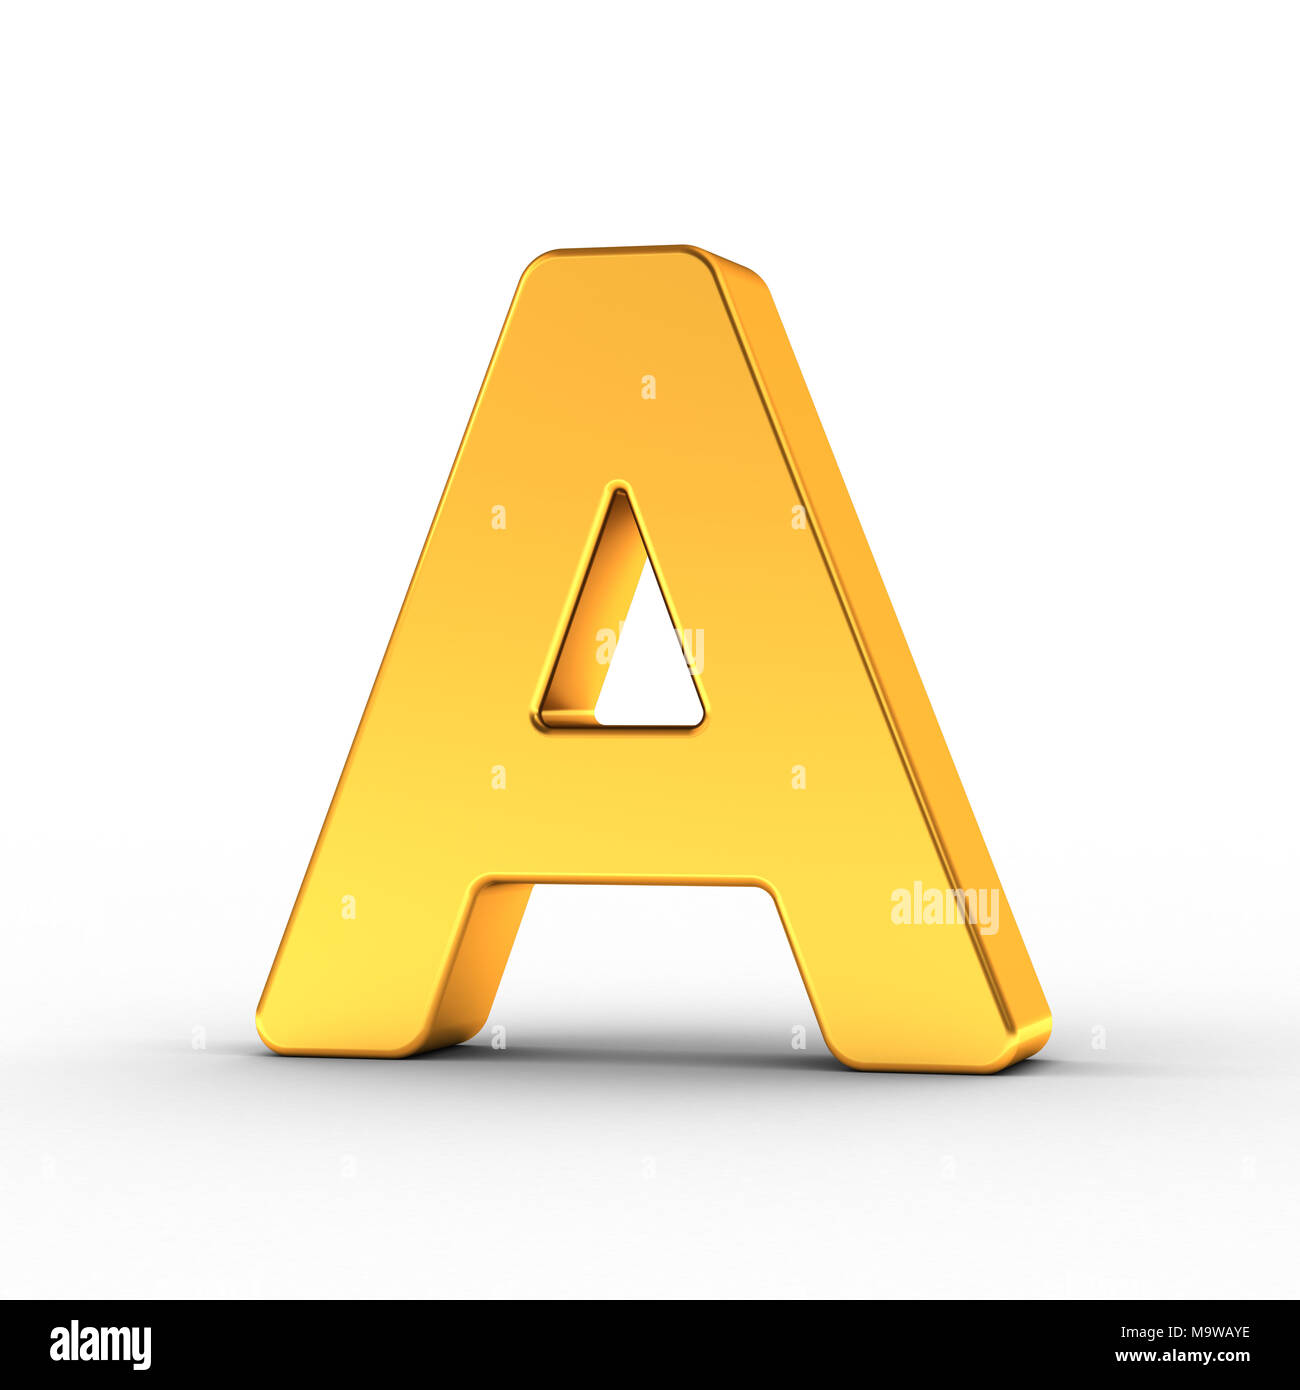 The Letter A as a polished golden object over white background with clipping path for quick and accurate isolation. Stock Photo